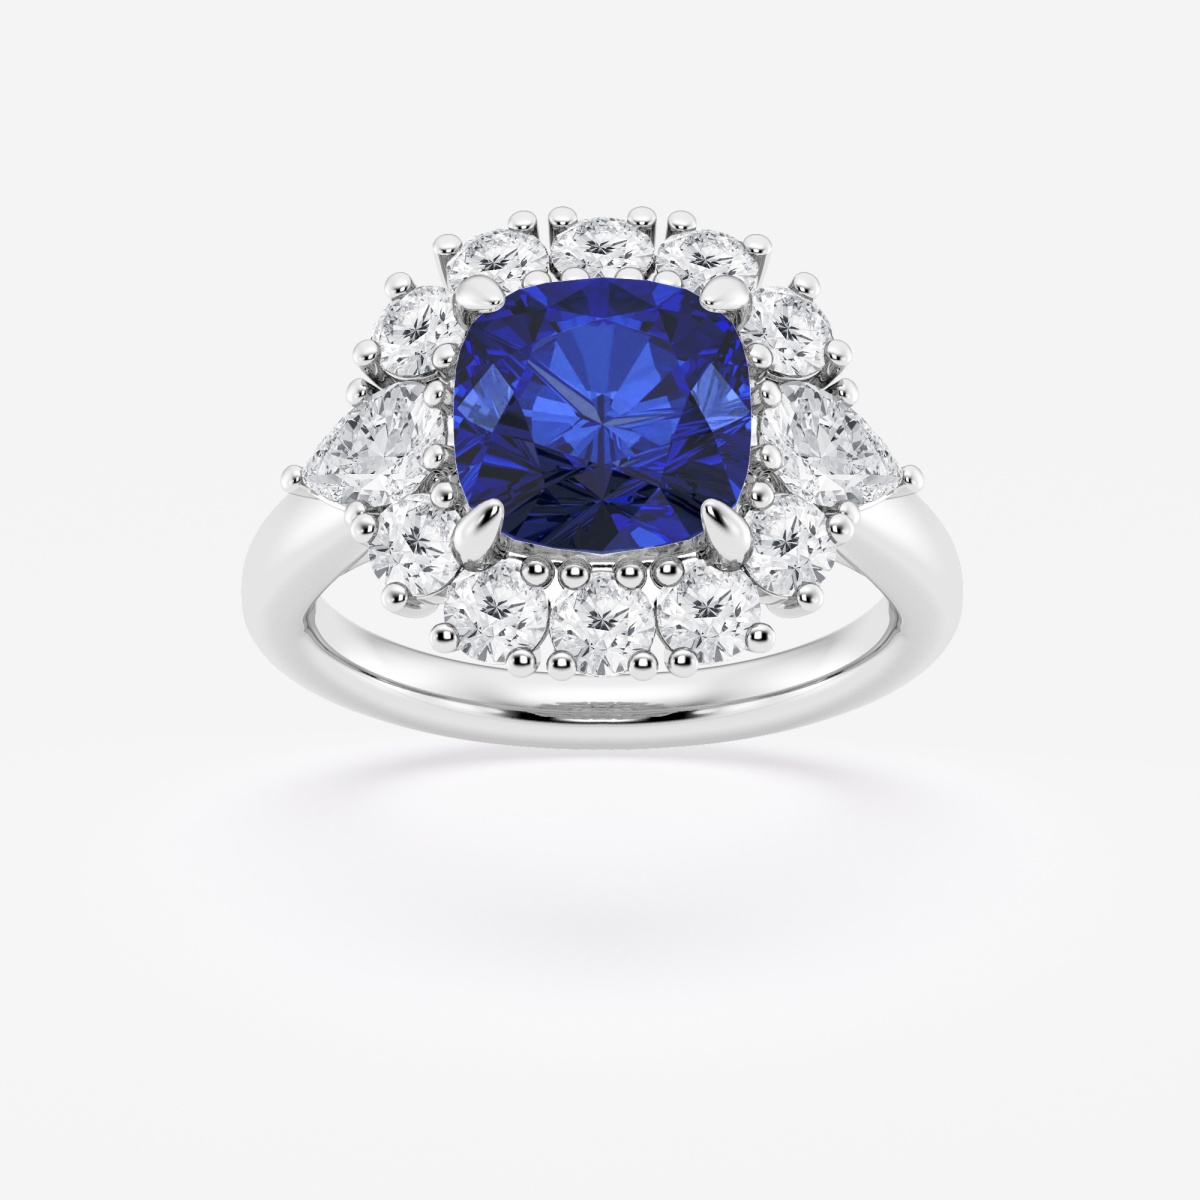 8 mm Cushion Cut Created Sapphire and 1 1/3 ctw Round and Pear Lab Grown Diamond Halo Engagement Ring